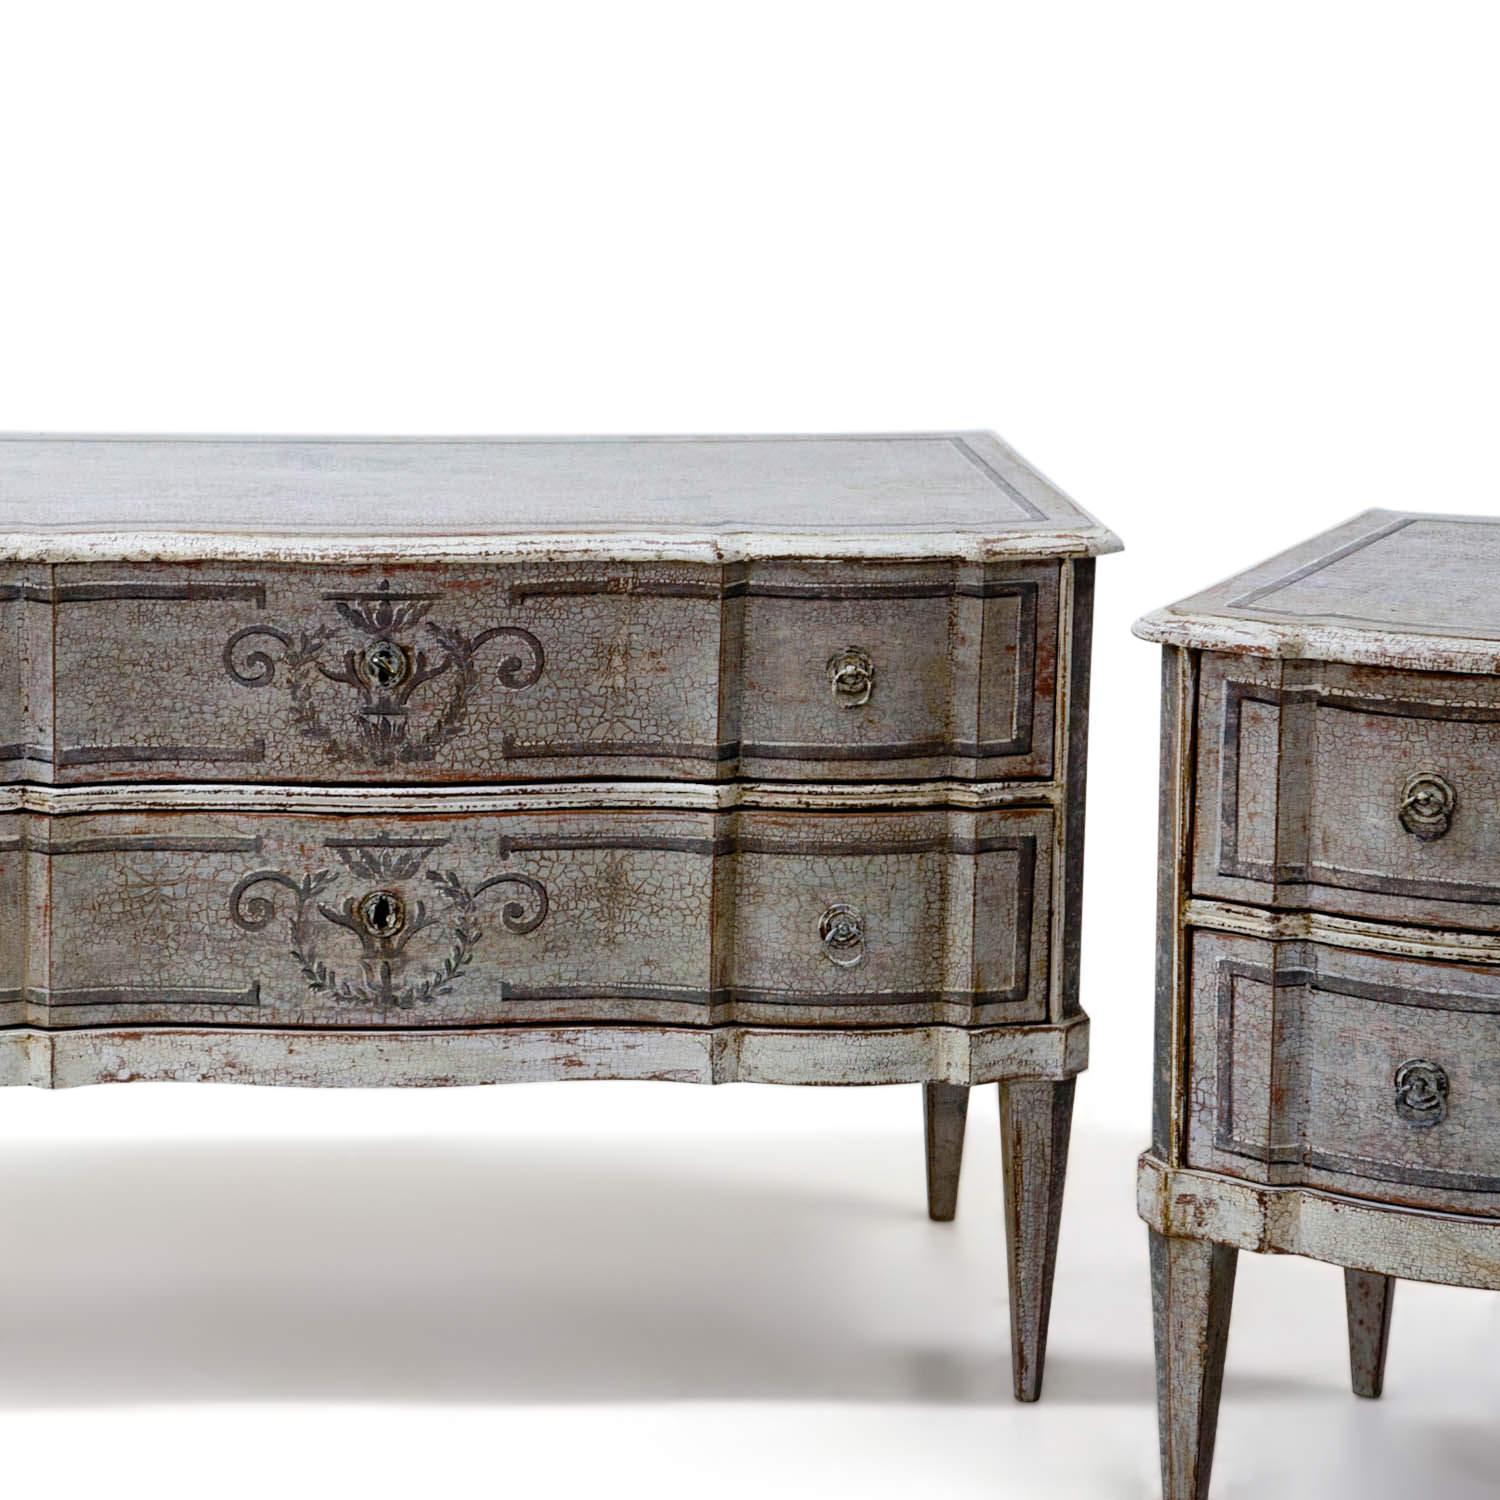 Pair of two-drawered Baroque chests of drawers with a serpentine front, standing on tall tapered feet. Very nice and large size. The grey paint is new and has a distressed look. Legs replaced.